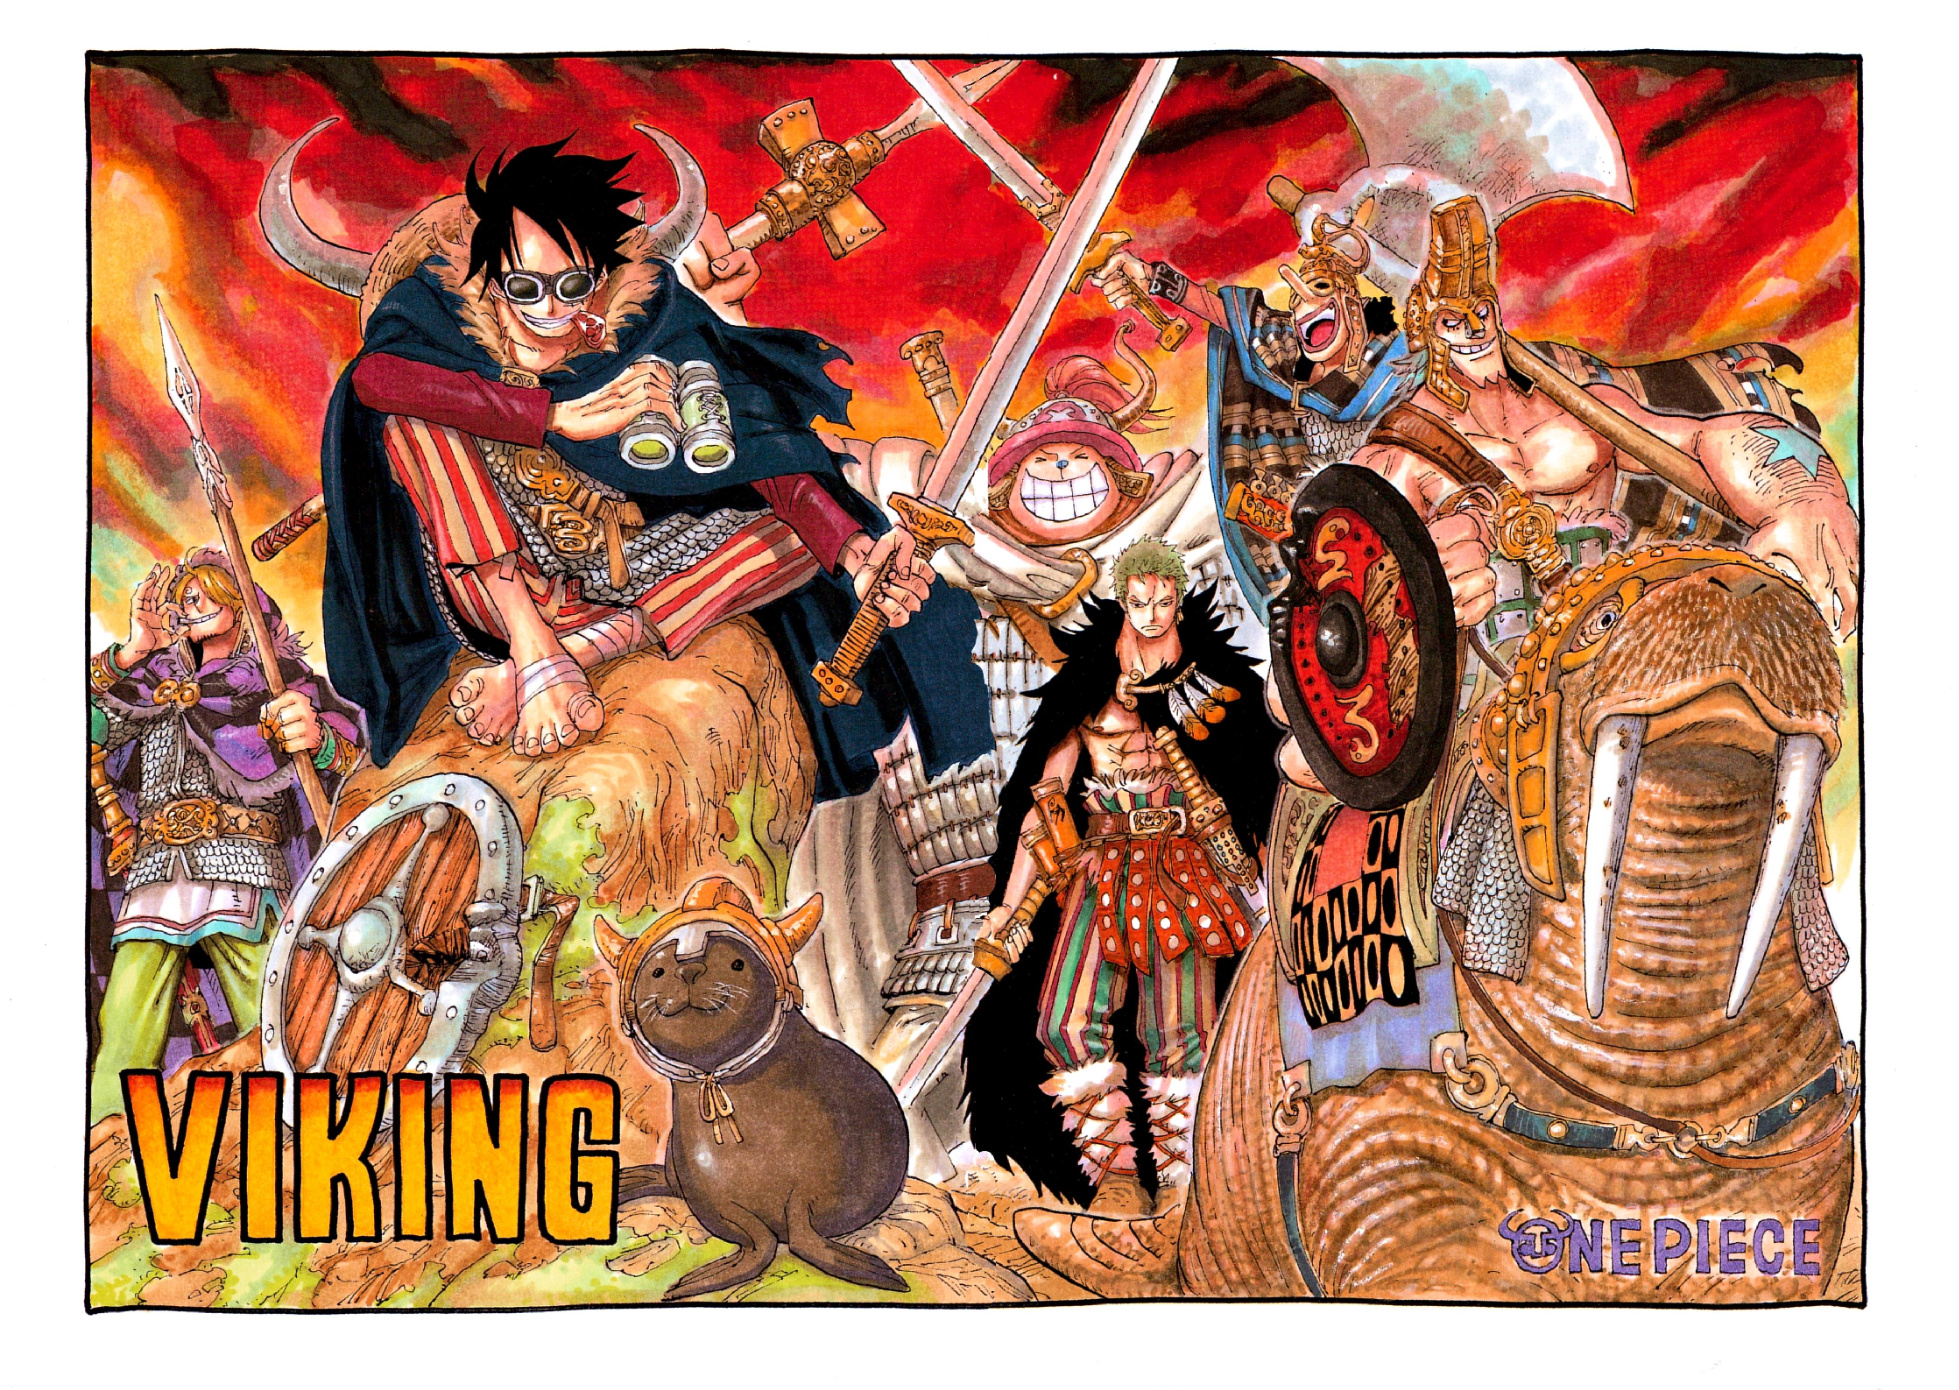 One Piece: Thriller Bark (326-384) (English Dub) Not Out of Danger